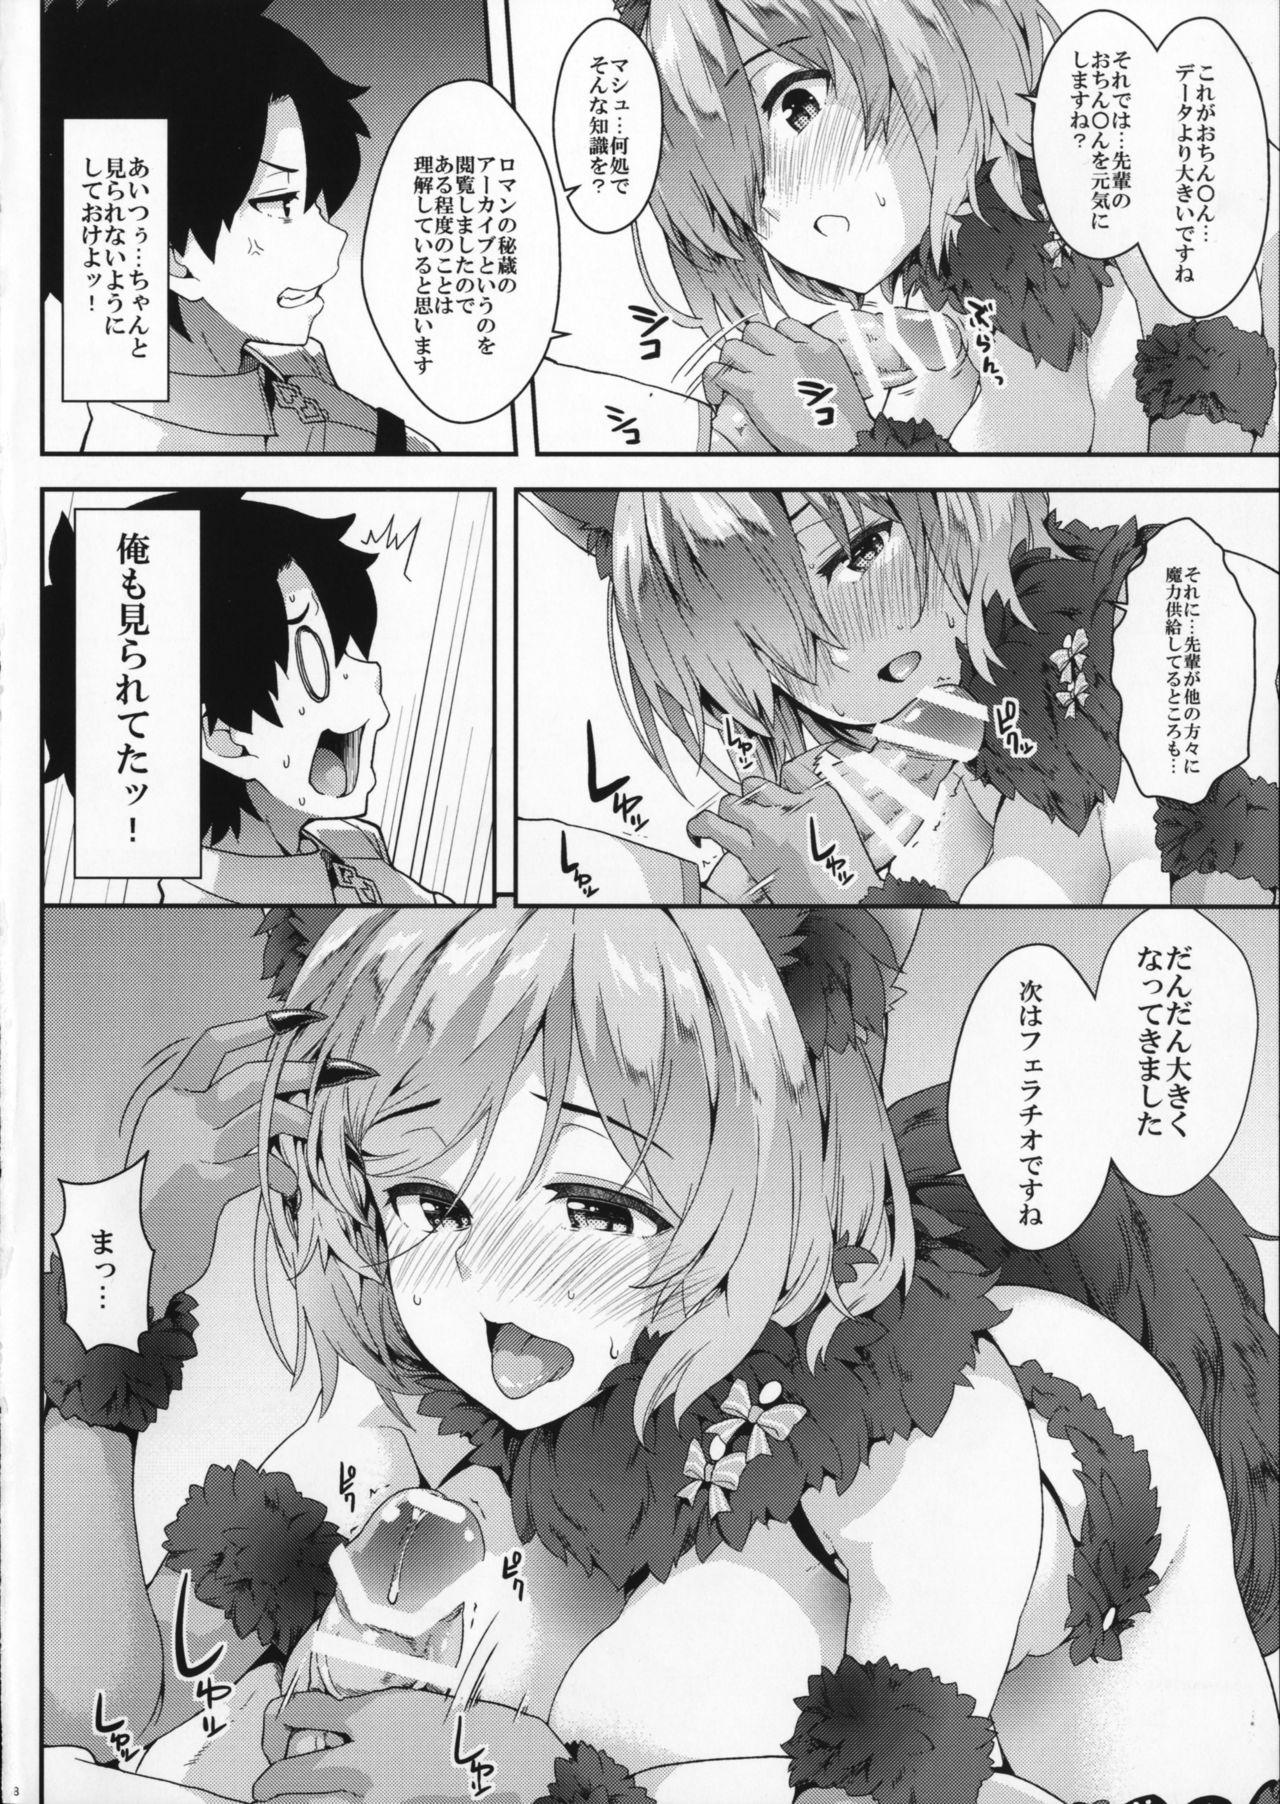 Brunet Why am I jealous of you? - Fate grand order Free Fuck - Page 7